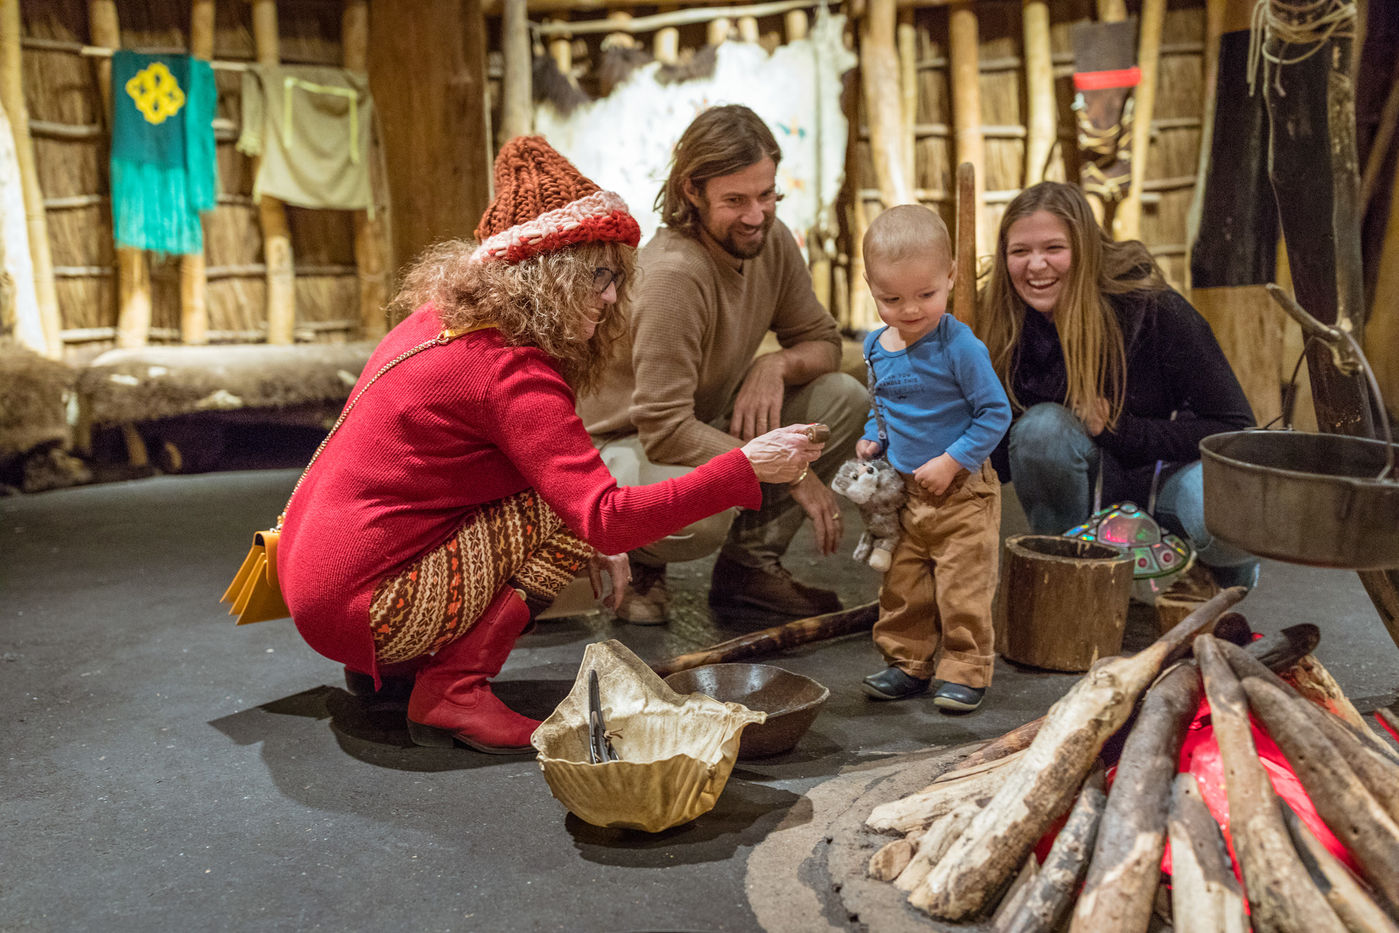 Visitors of all ages can engage with objects from everyday Pawnee life in the 1800s, including buffalo horn spoons.